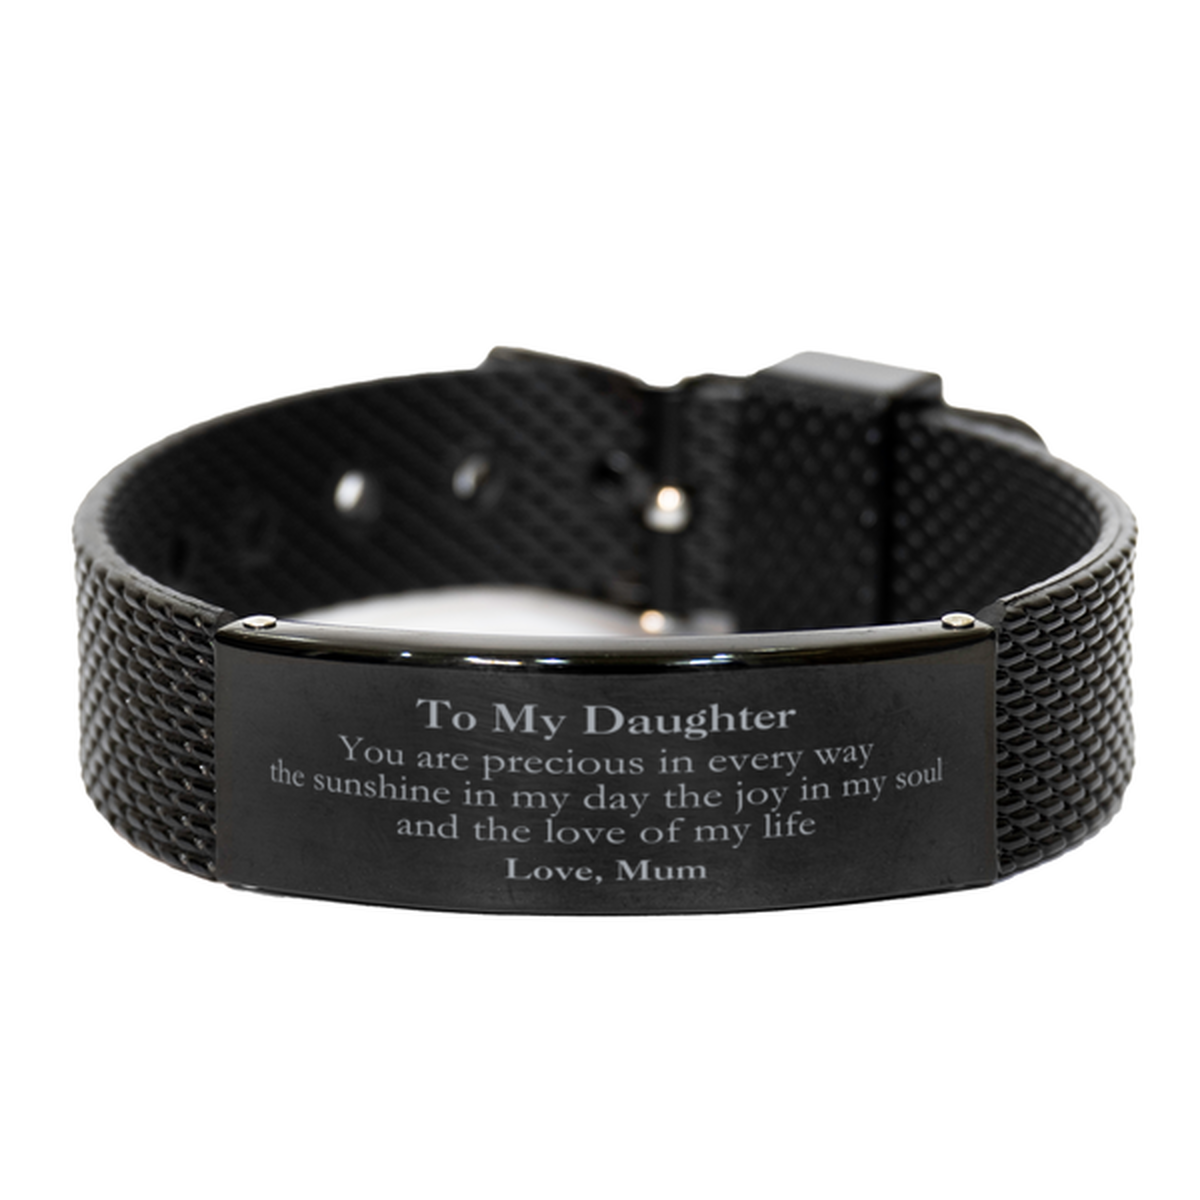 Graduation Gifts for Daughter Black Shark Mesh Bracelet Present from Mum, Christmas Daughter Birthday Gifts Daughter You are precious in every way the sunshine in my day. Love, Mum